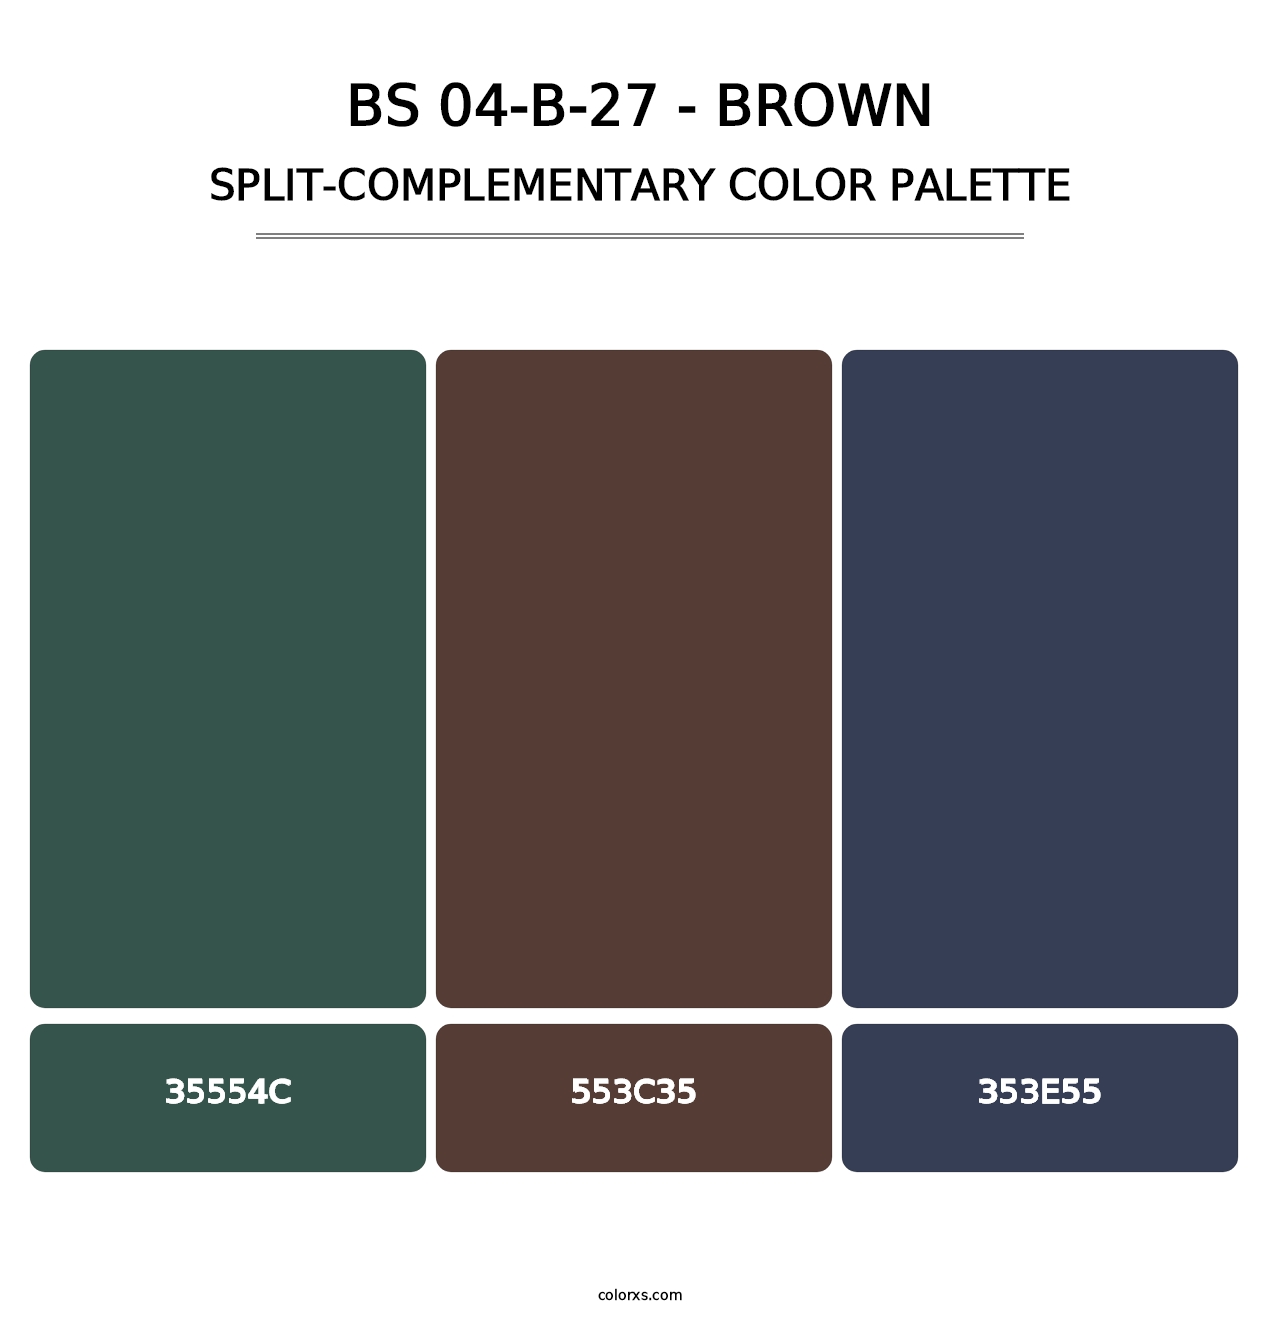 BS 04-B-27 - Brown - Split-Complementary Color Palette